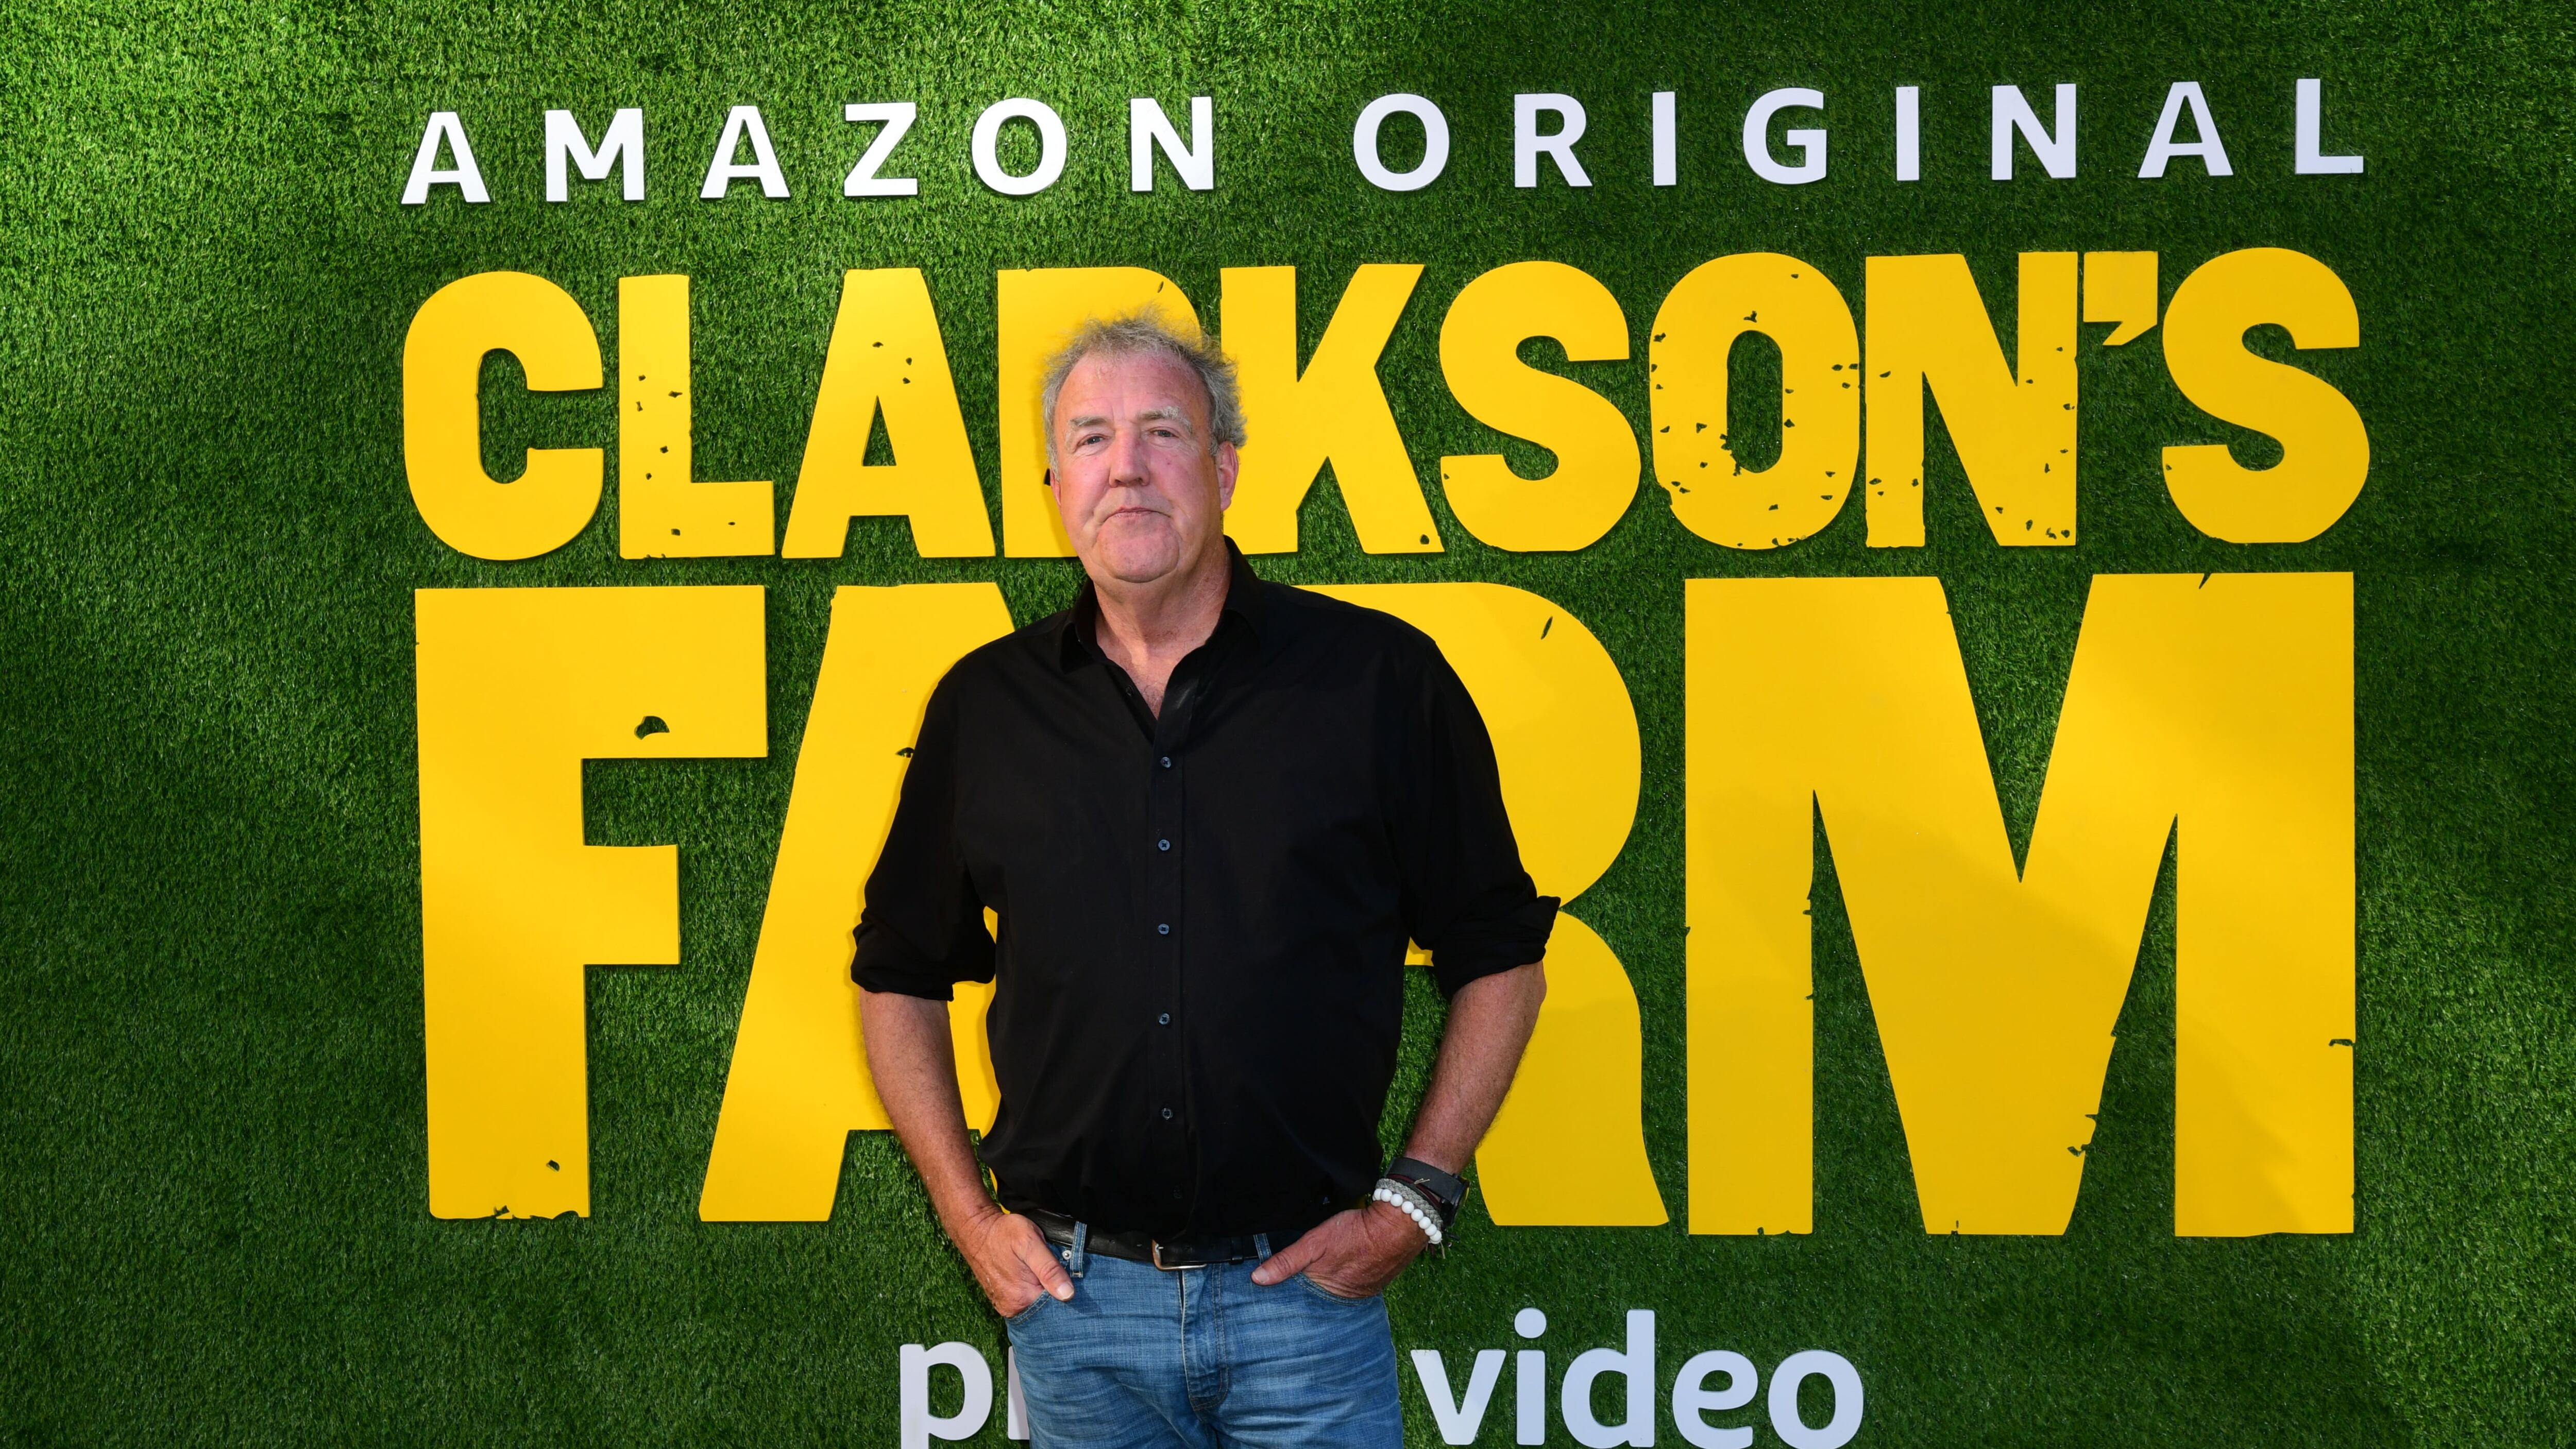 Rightmove said it has seen another leap in property searches for Chadlington in Oxfordshire following the second season launch of Clarkson’s Farm.